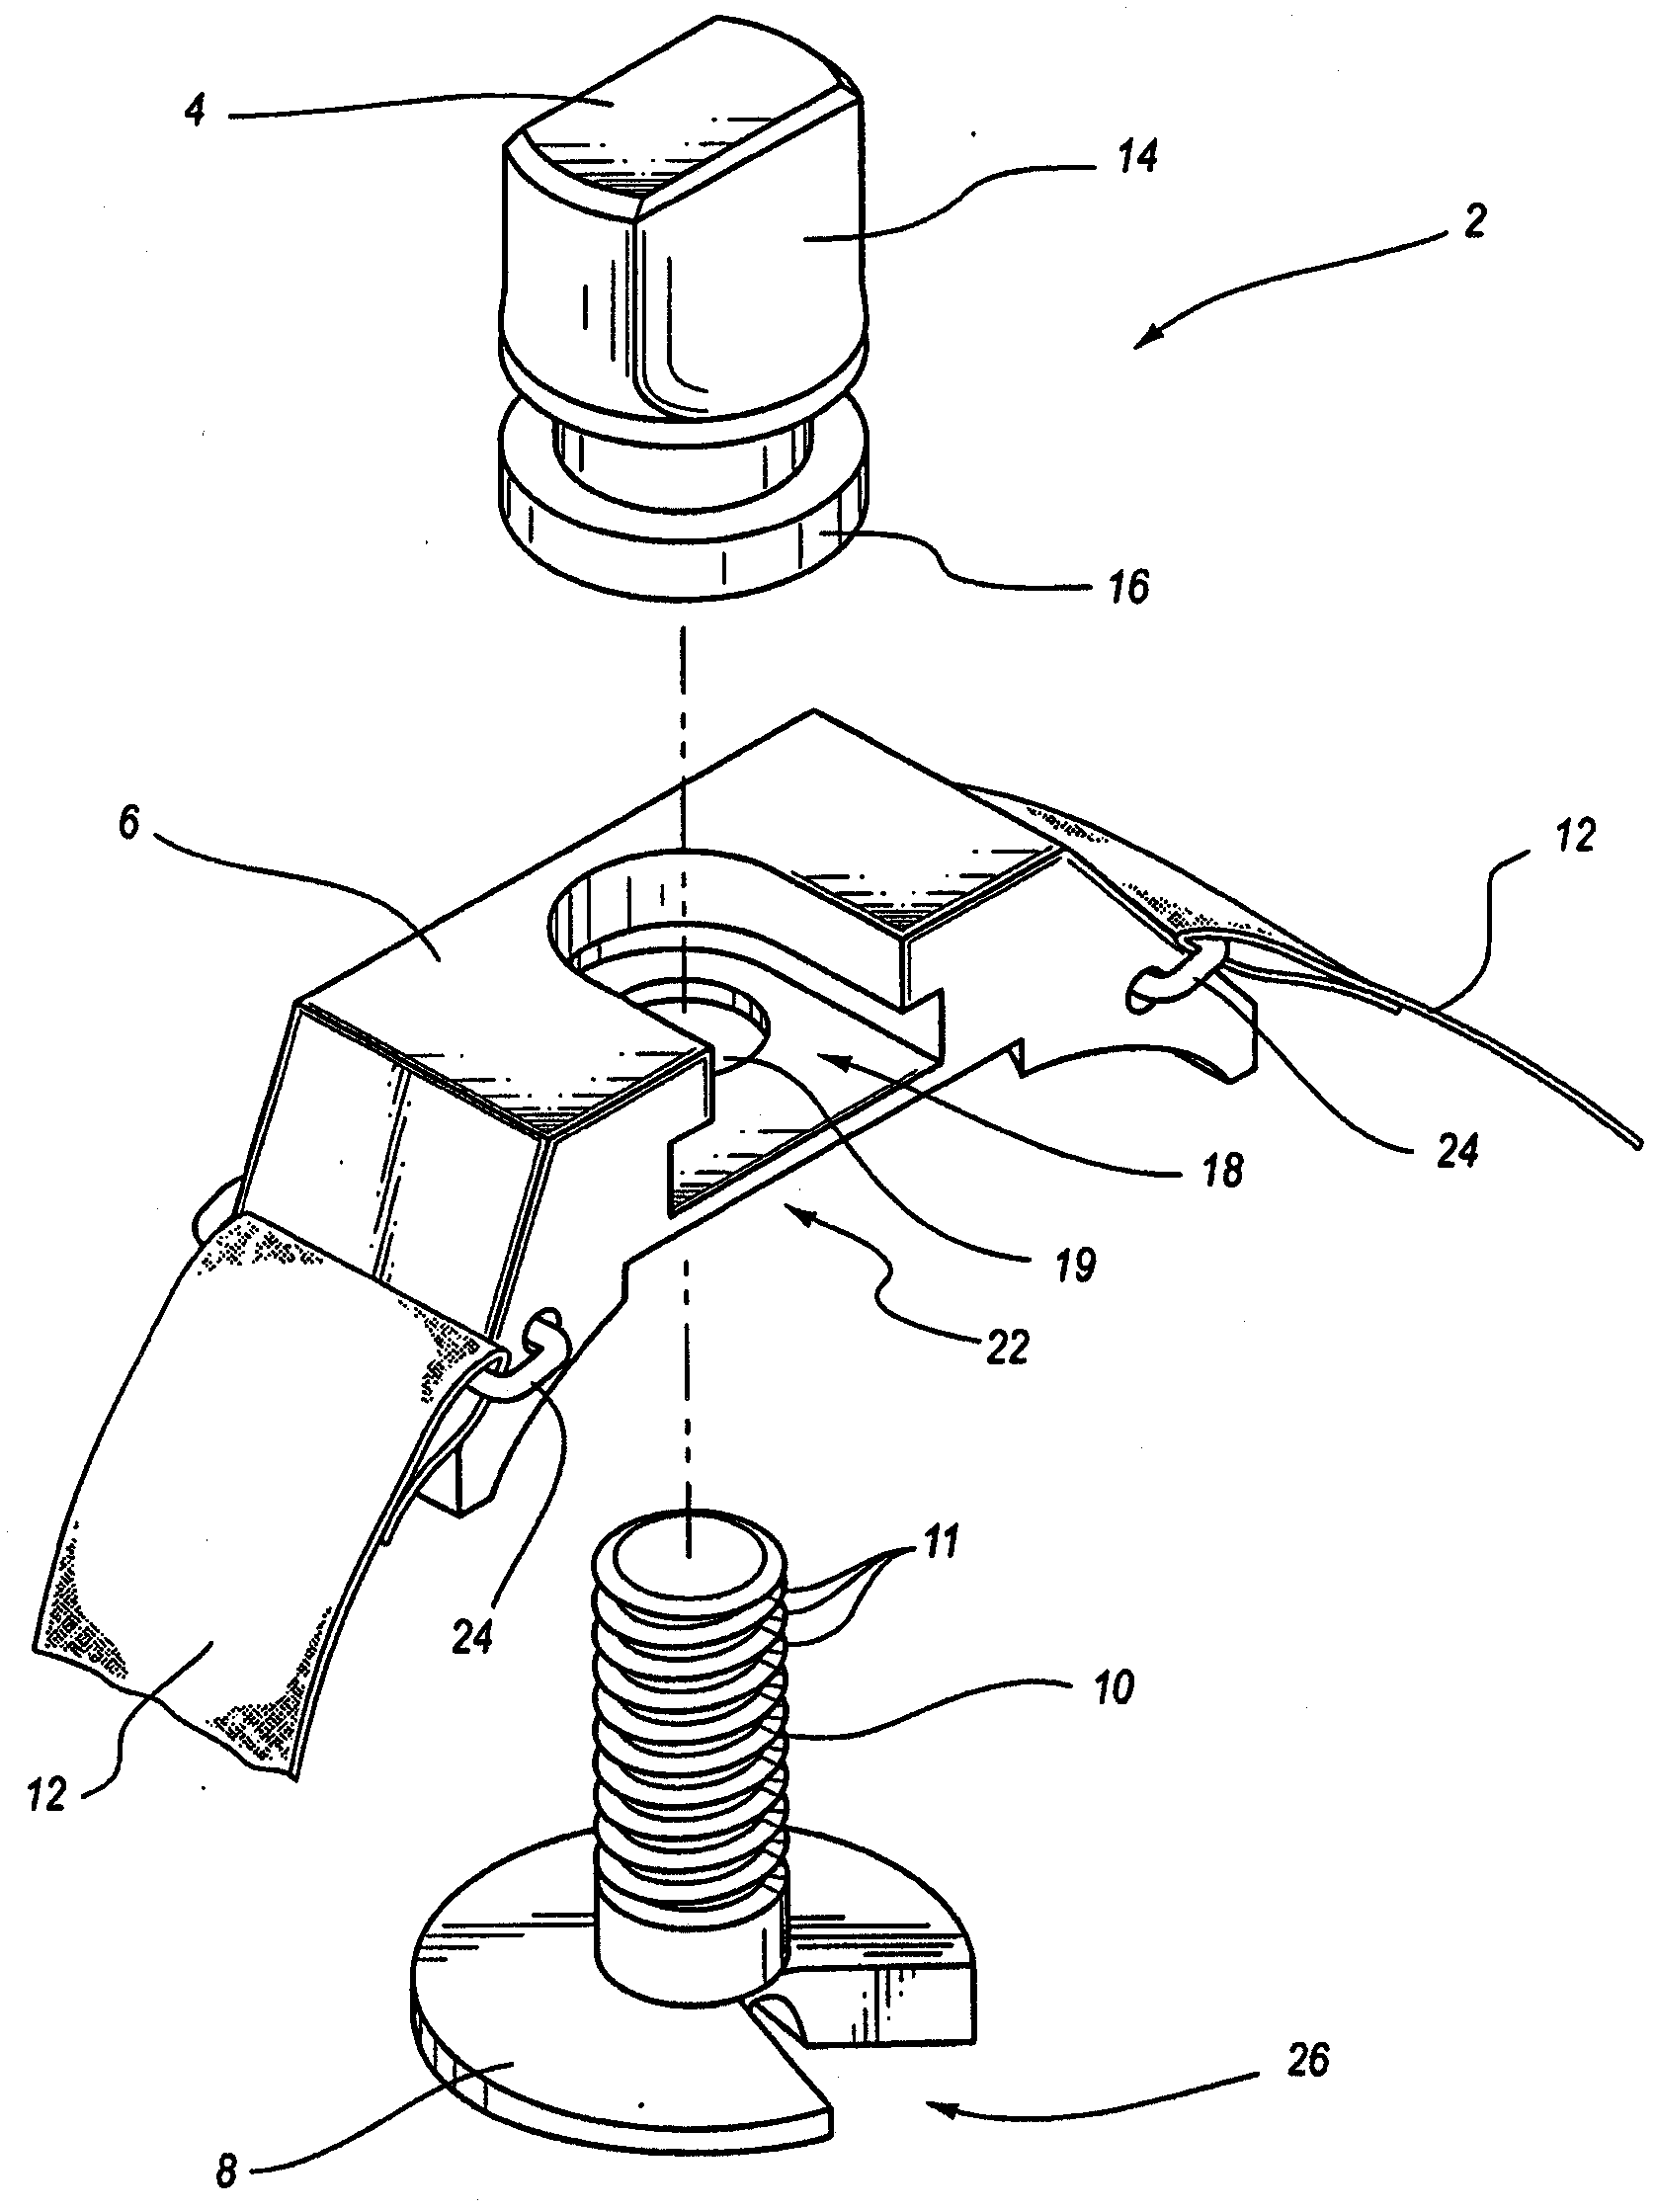 Radial artery compression device